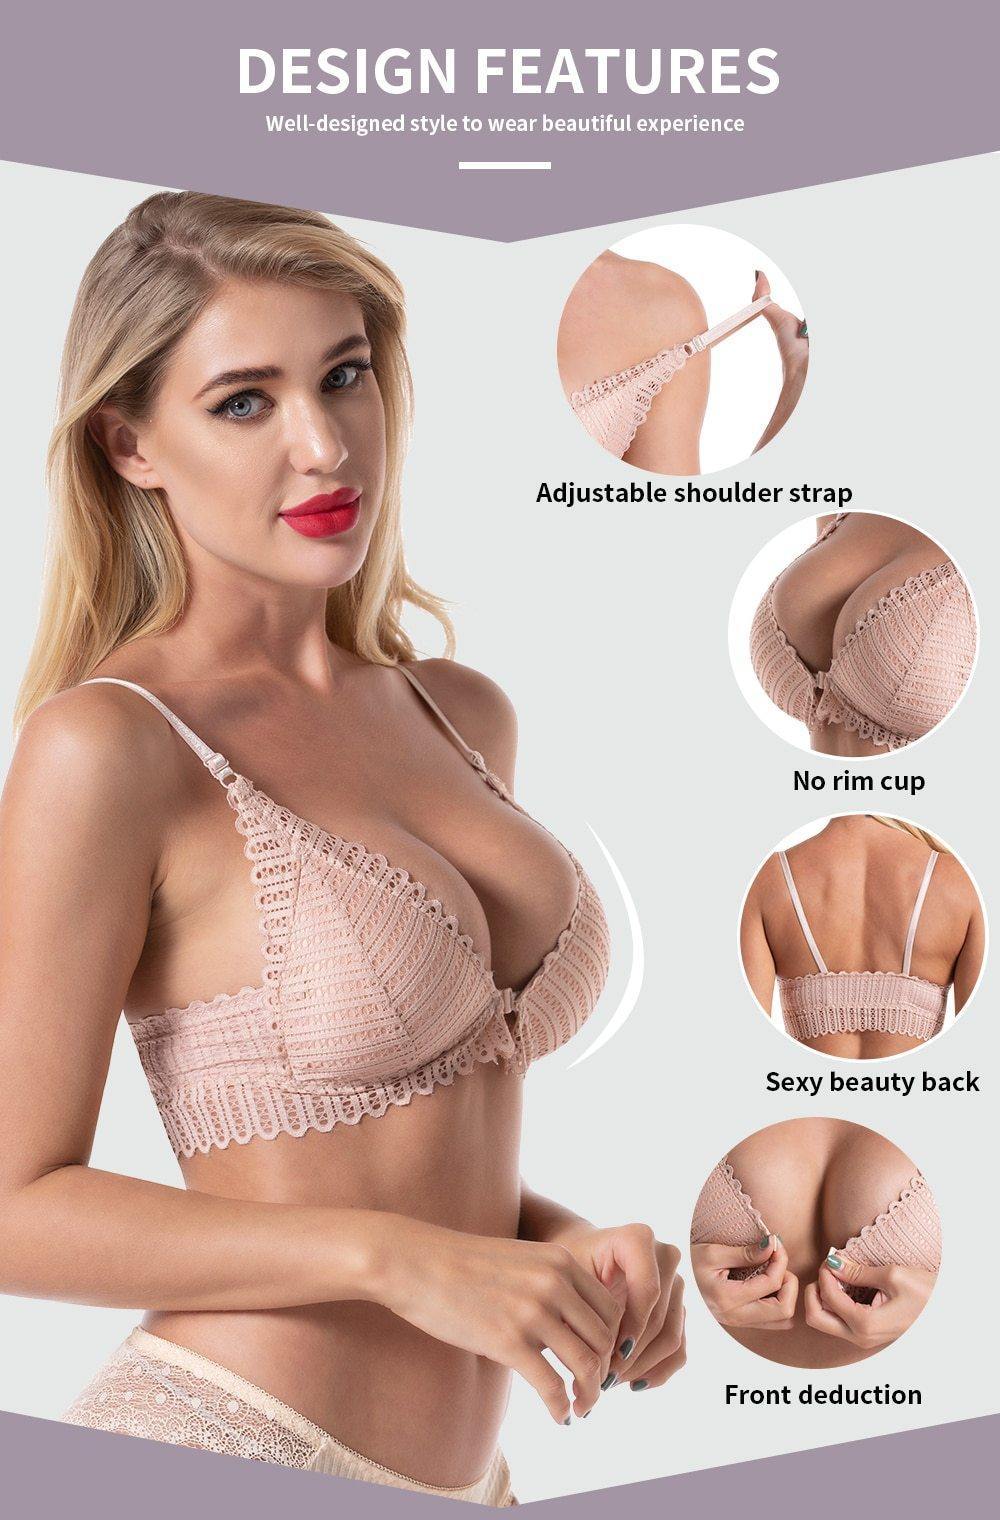 French Lace Embroidery Lingerie | Fashionsarah.com